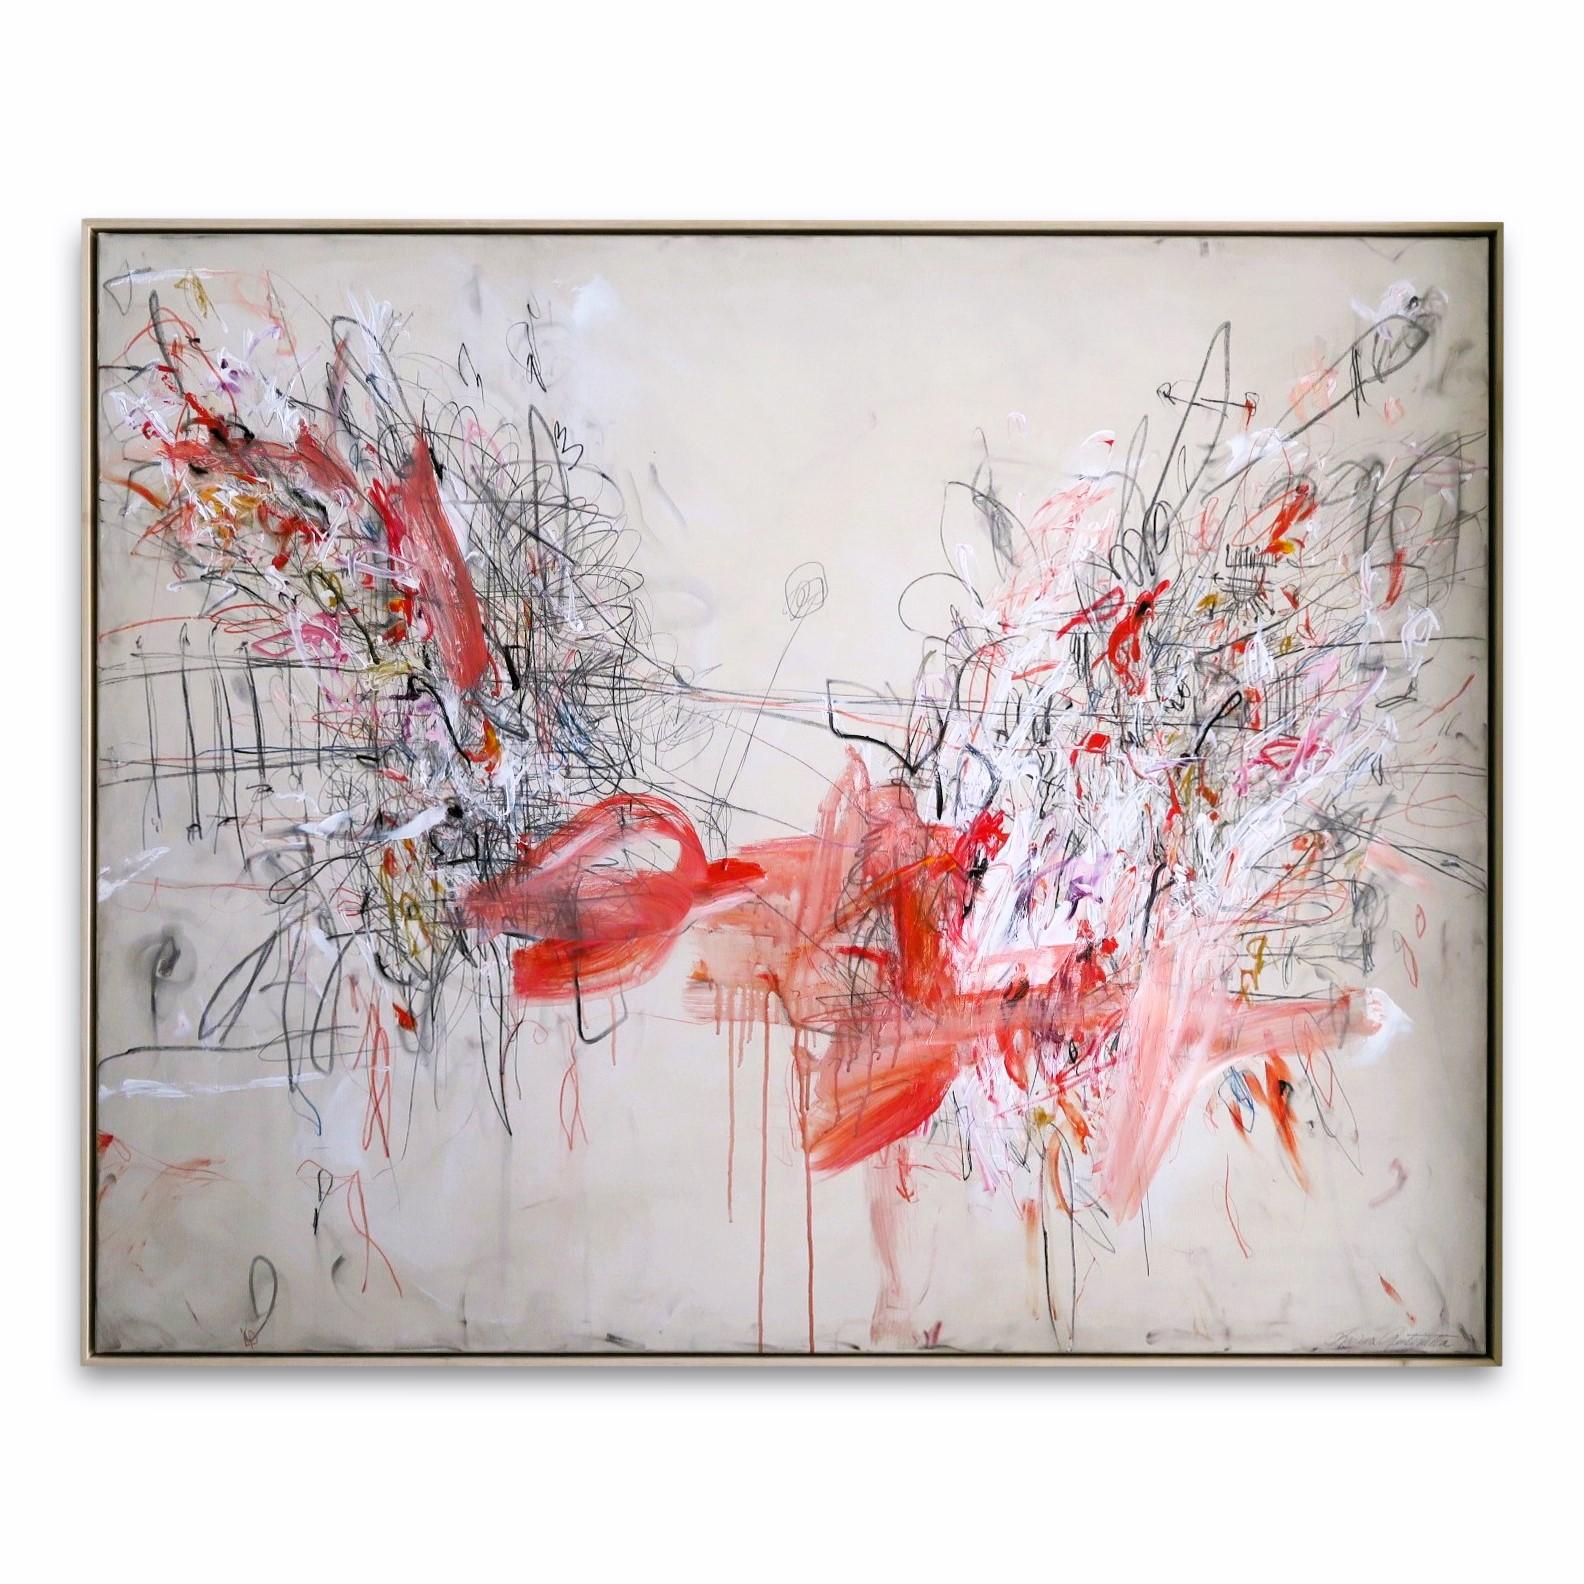 "Vermiglio" Large Scale Acrylic, Oil Pastels and Pencils Abstract in Red 48x60 - Mixed Media Art by Karina Gentinetta